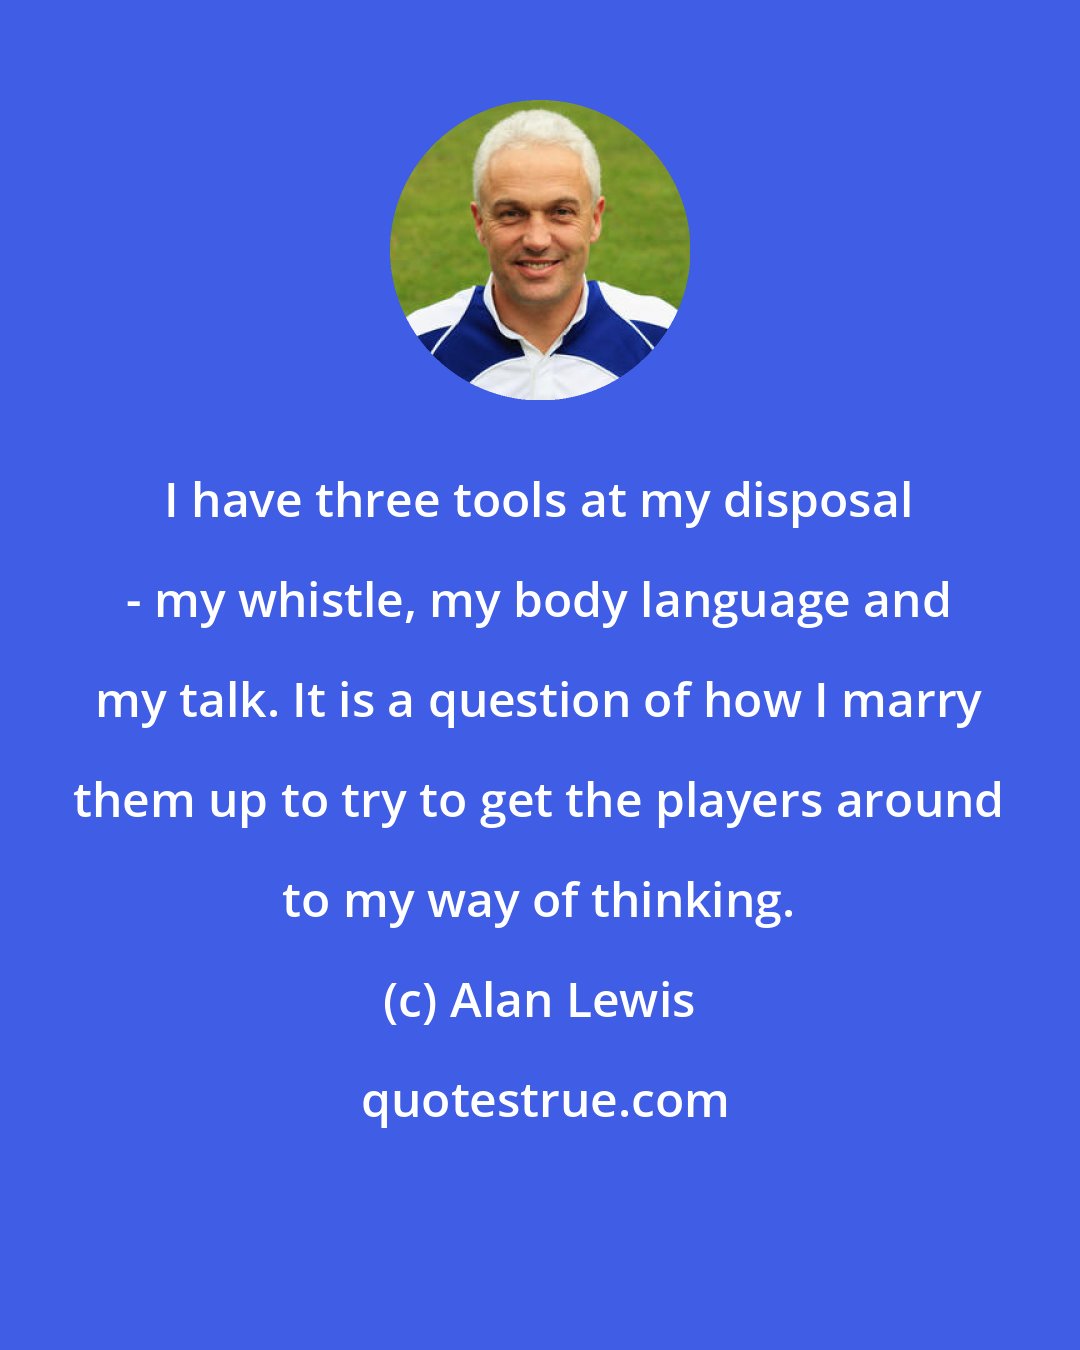 Alan Lewis: I have three tools at my disposal - my whistle, my body language and my talk. It is a question of how I marry them up to try to get the players around to my way of thinking.